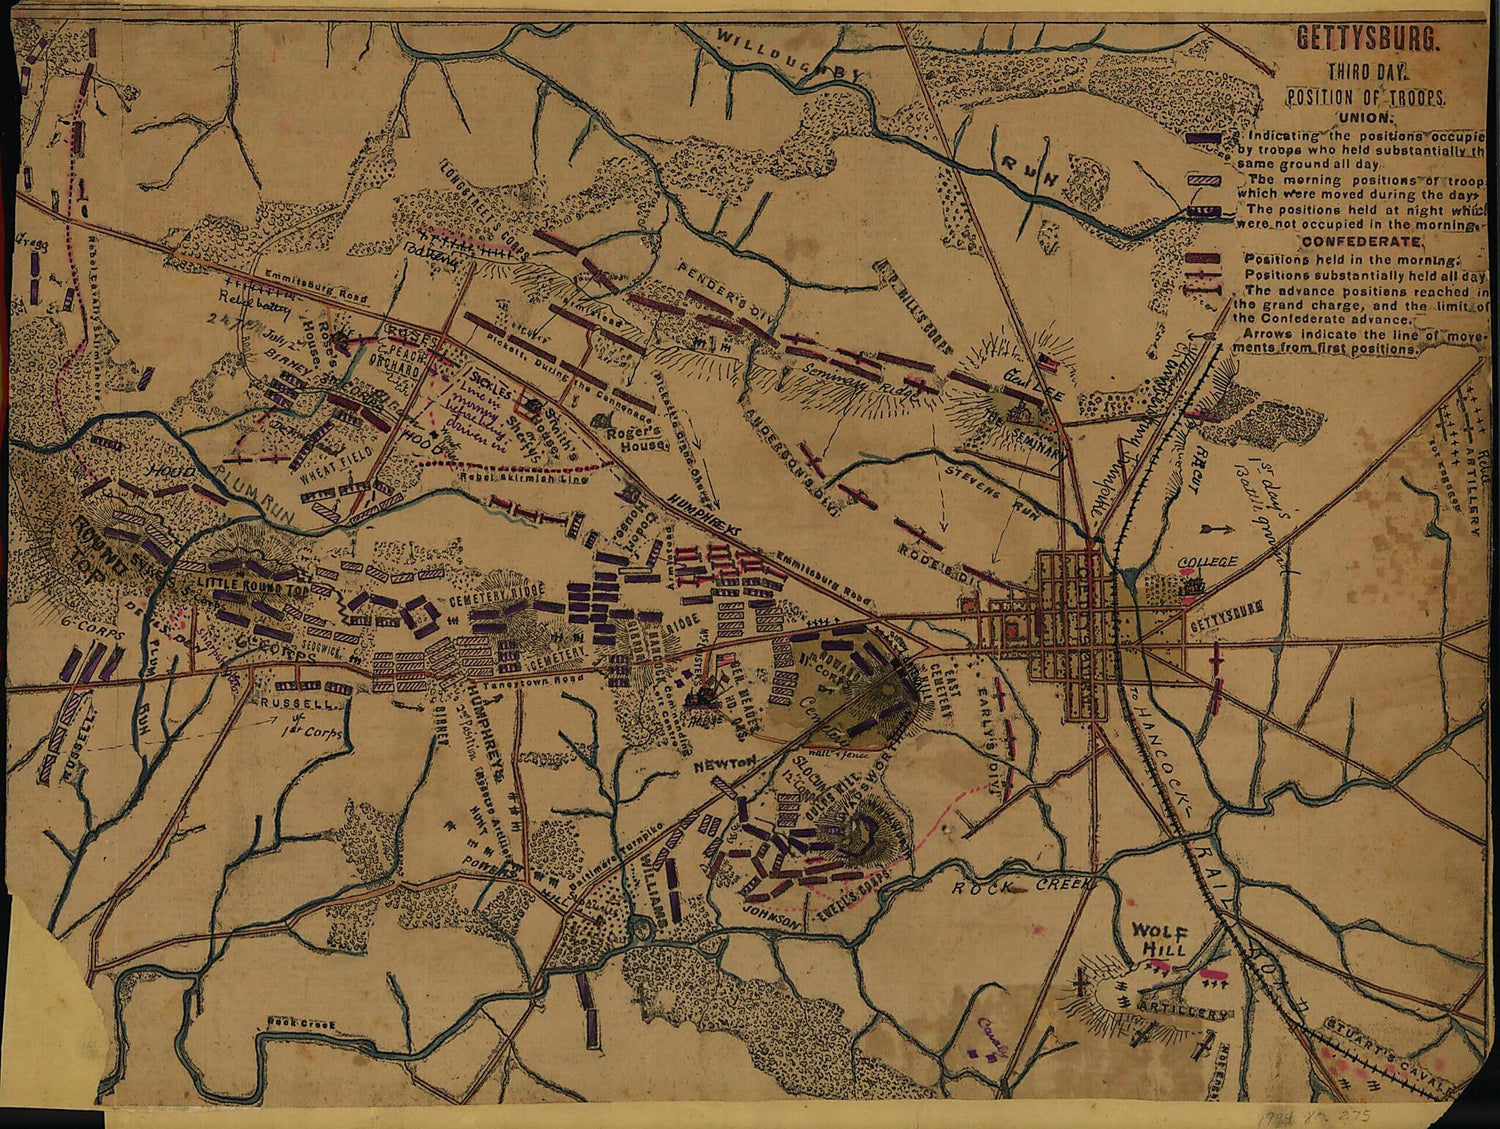 This old map of Gettysburg Third Day. Position of Troops from 07-02 was created by Robert Knox Sneden in 07-02